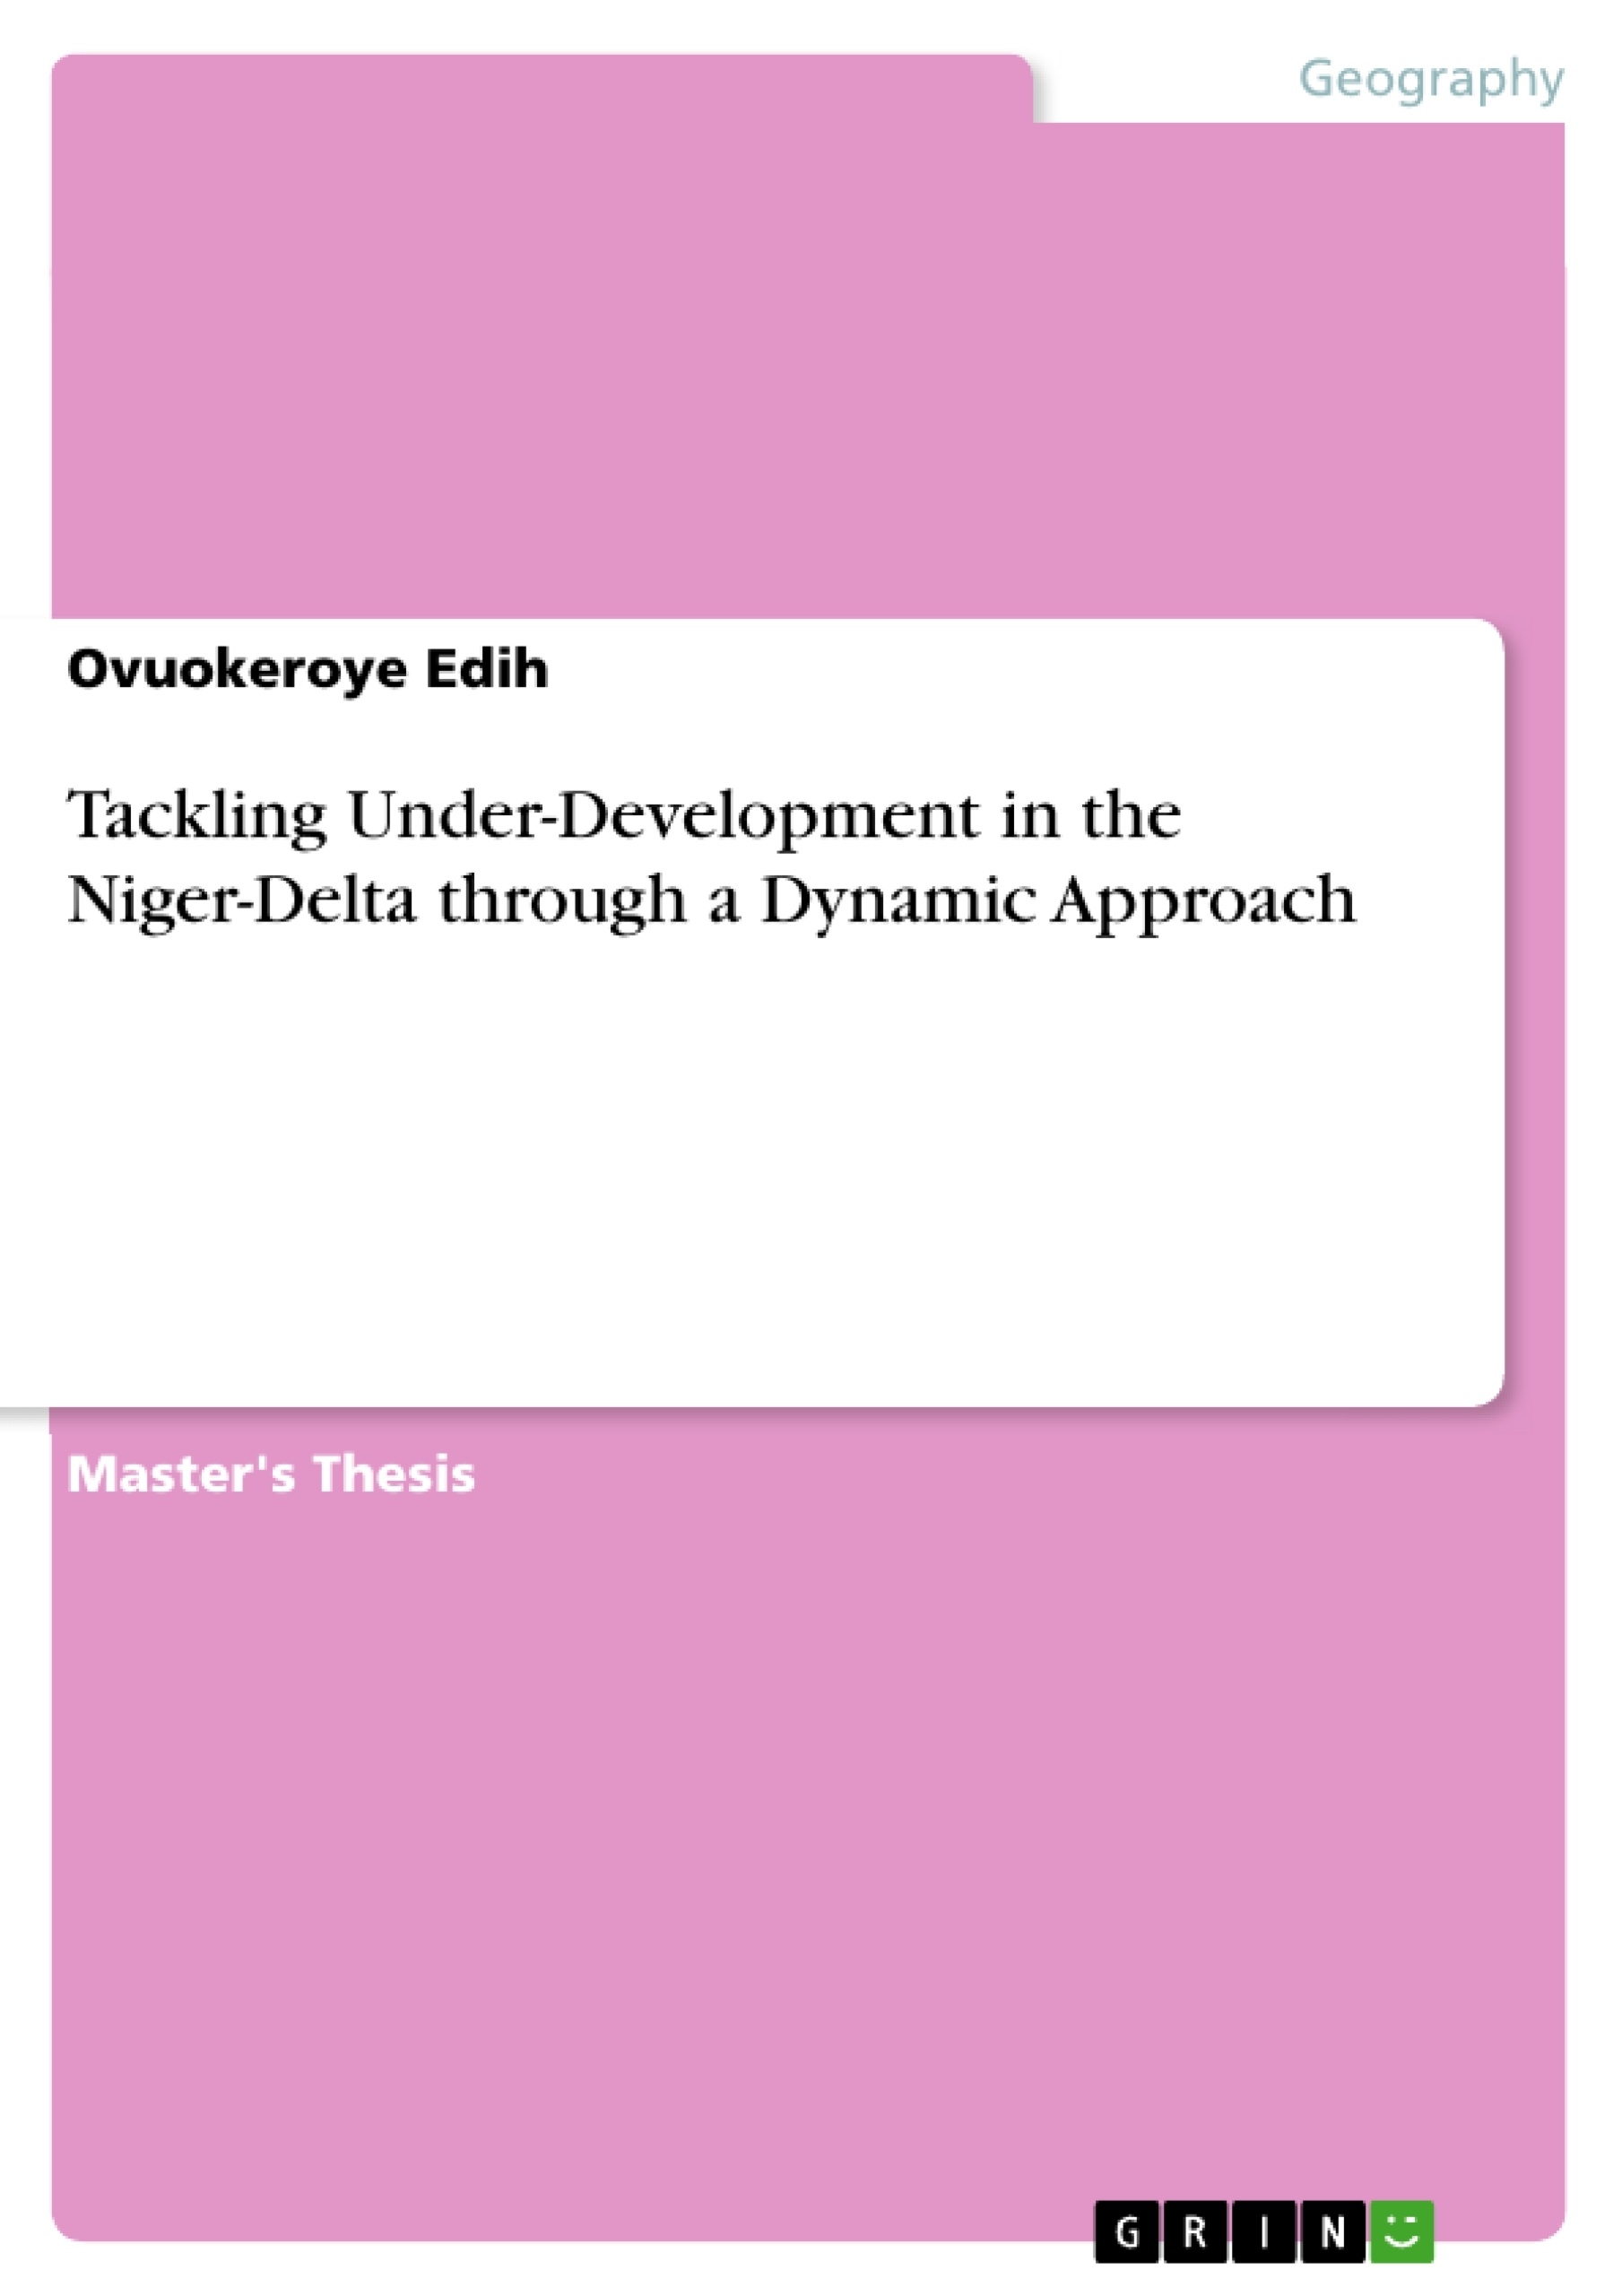 Titre: Tackling Under-Development in the Niger-Delta through a Dynamic Approach